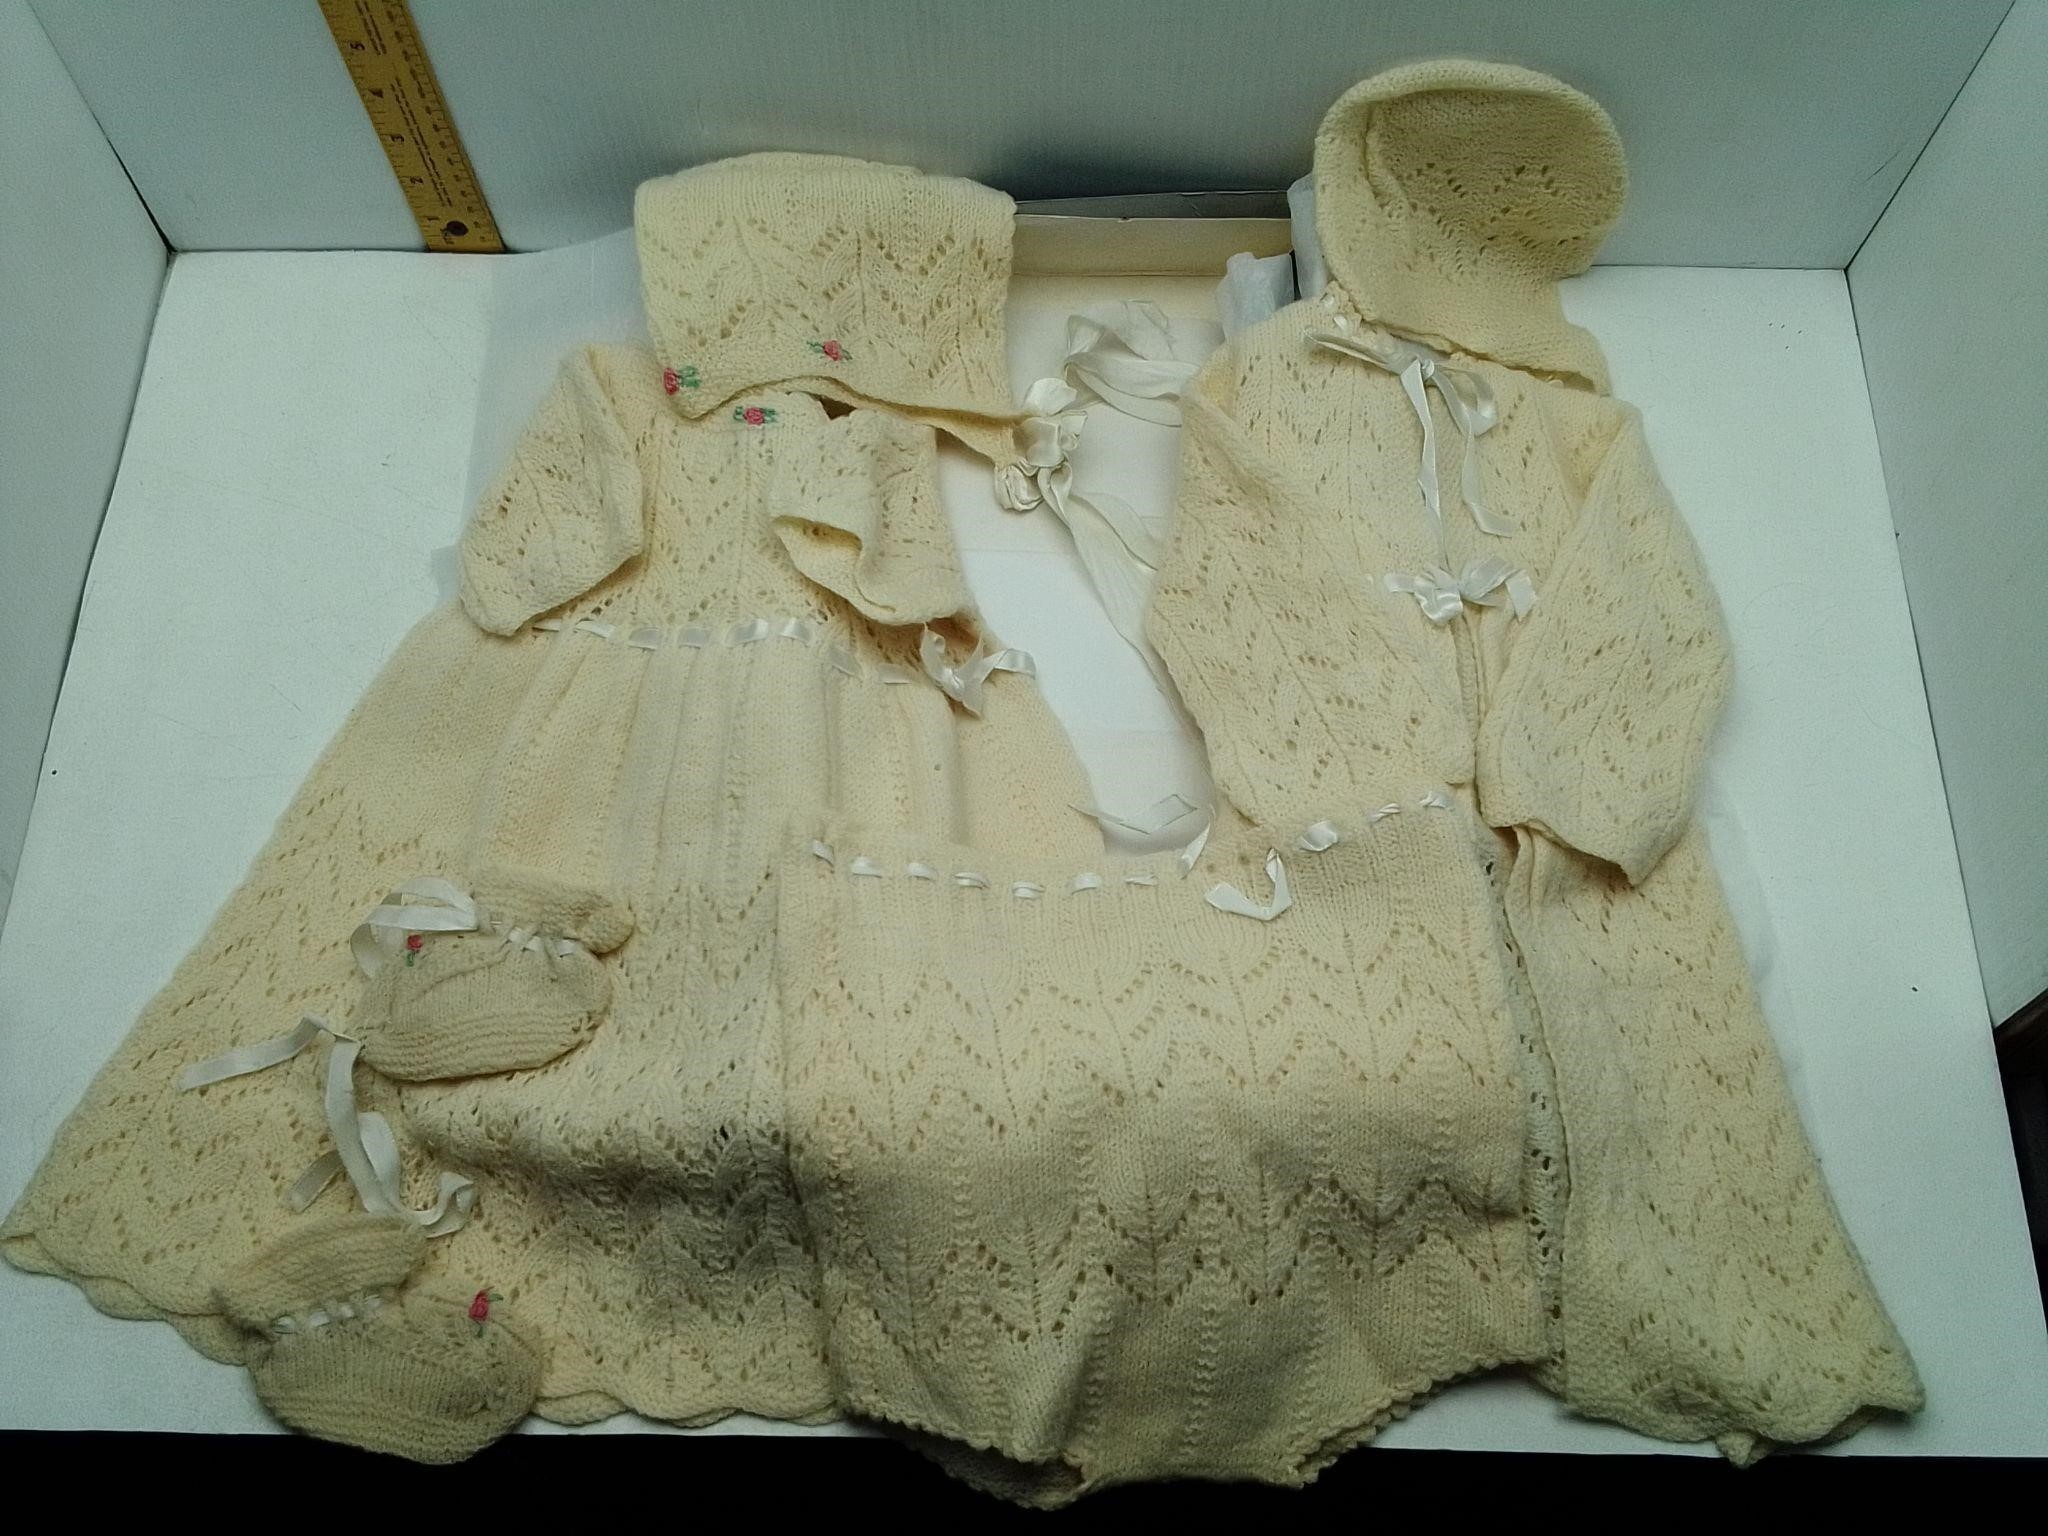 1940s HAND KNITTED BABY CLOTHES W/ RECEIPT